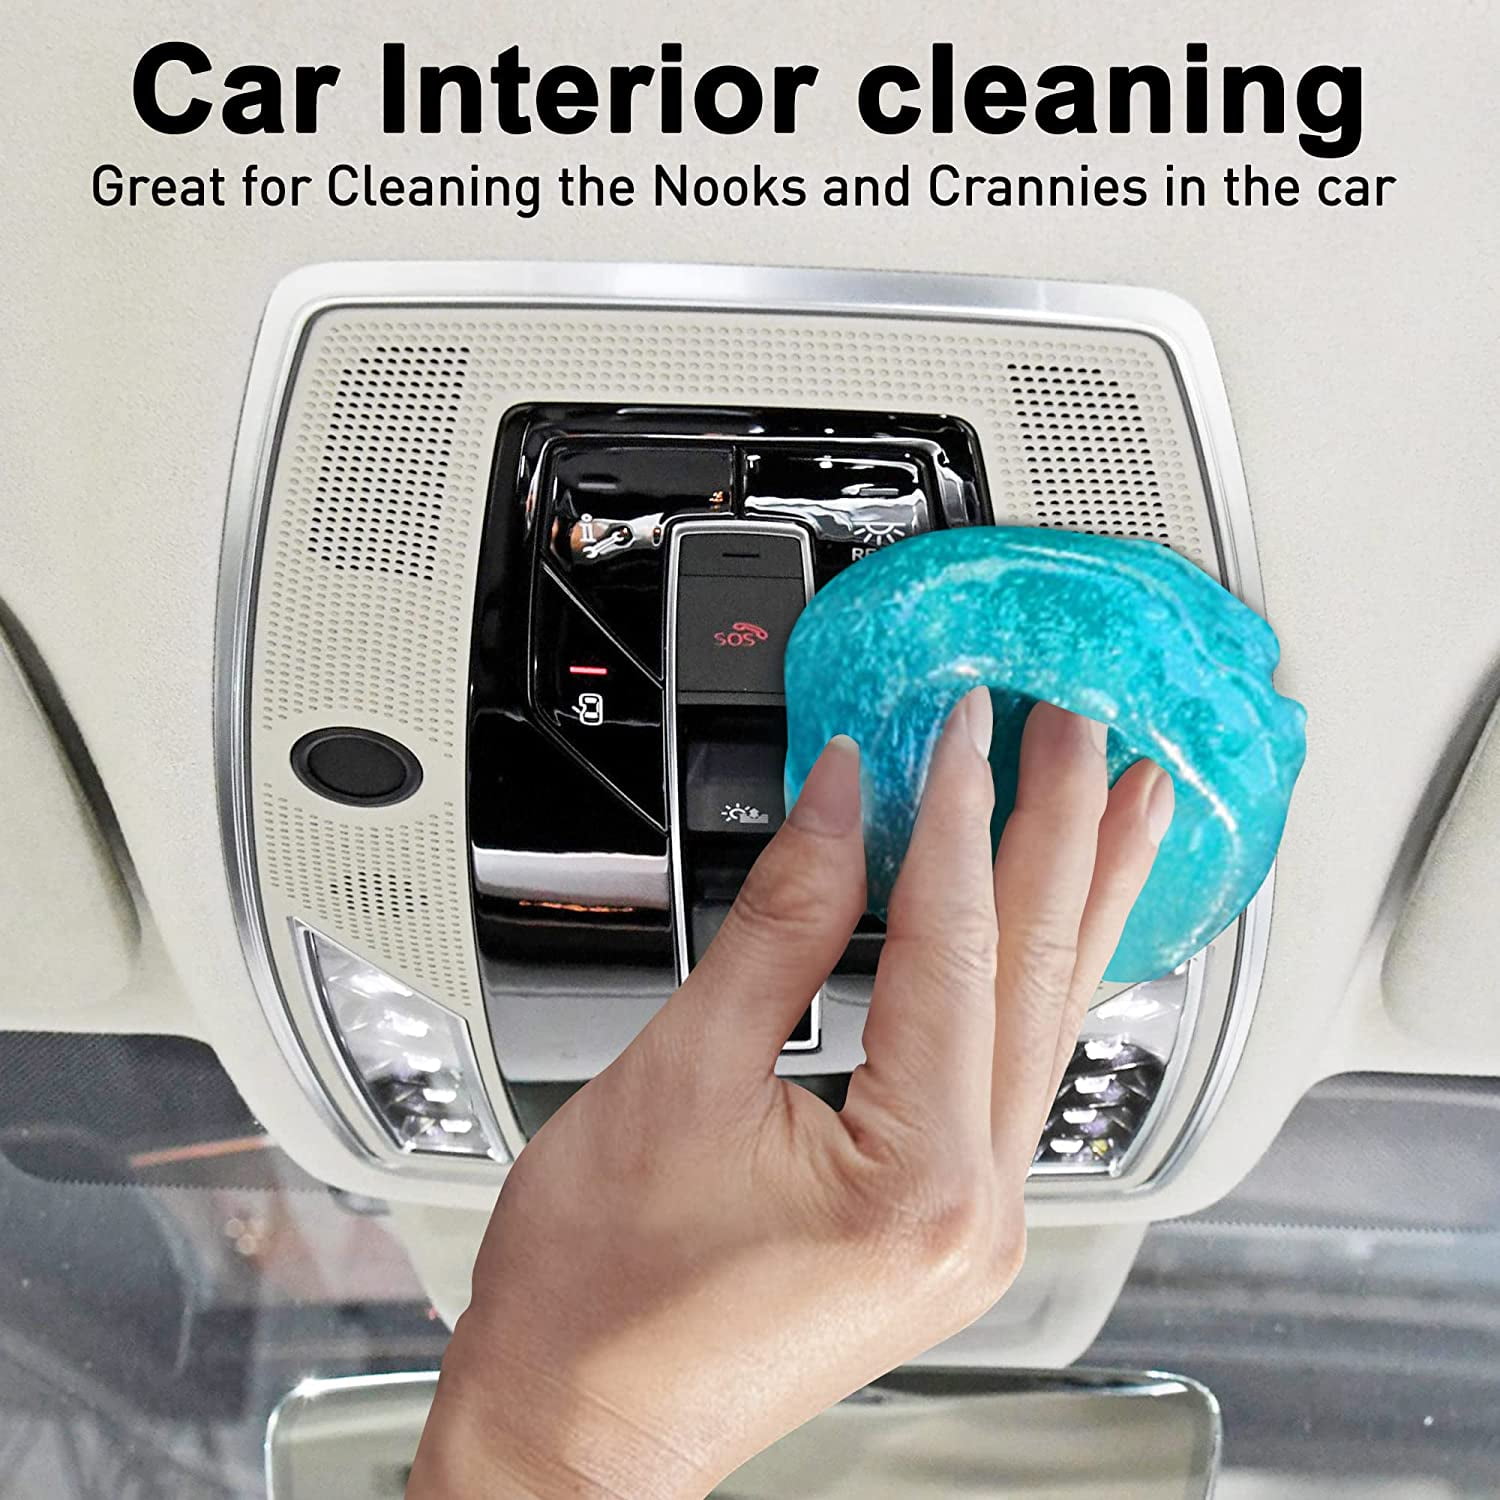 ASFSKY Car Putty Car Cleaning Gel Car Cleaner Gel Detailing Putty Dust Cleaning Tool for PC Tablet Laptop,Car Vents,Car Interiors,Home,Printers